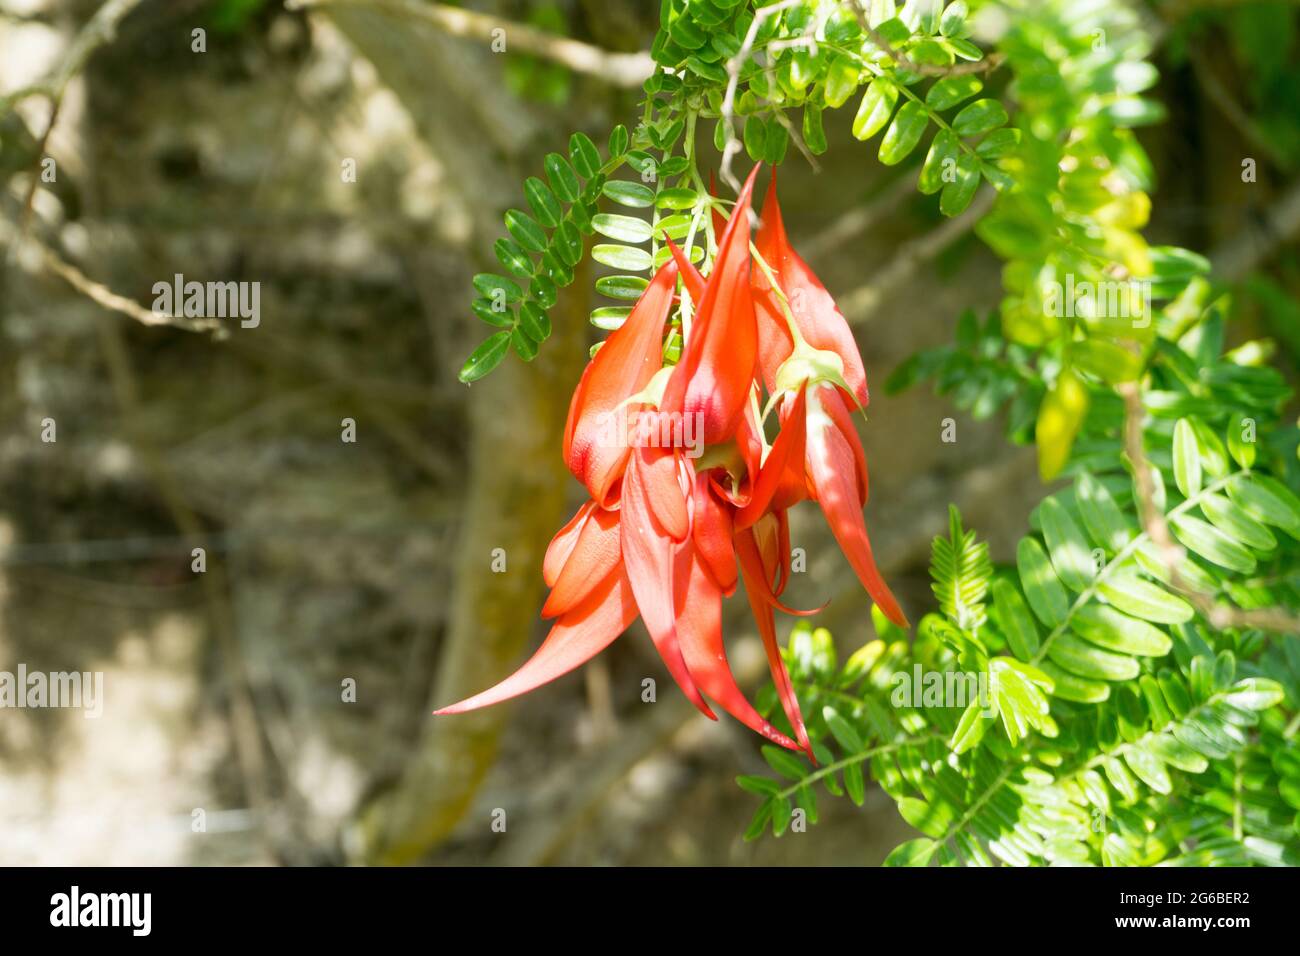 Lobster Claw (Clianthus puniceus) flowering at Abbey Gardens, Tresco, Isles of Scilly, Cornwall, UK Stock Photo